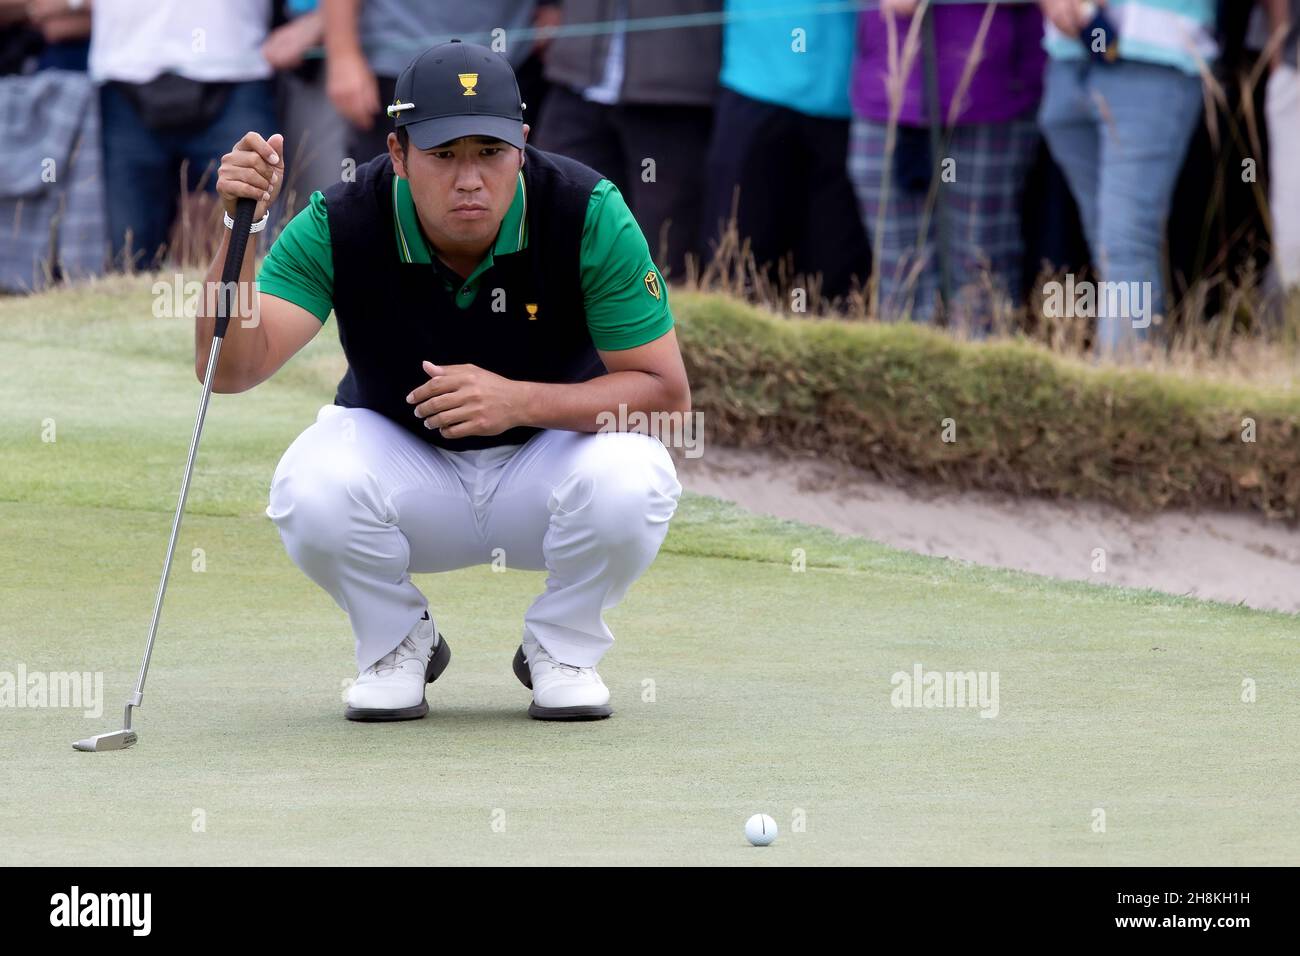 Hideki Matsuyama of Japan lines up his putt during round 2 of The Presidents Cup Credit: Speed Media/Alamy Live News Stock Photo